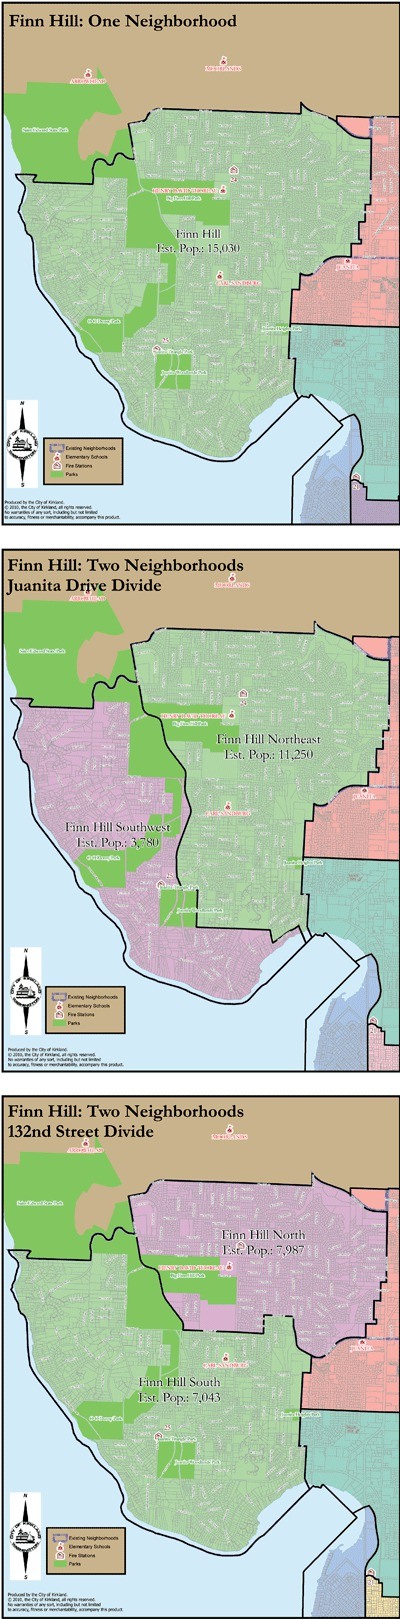 These three maps represent the options that will be deliberated on during the next six months if the Kirkland City Council approves the Planning Commission's recommendations.